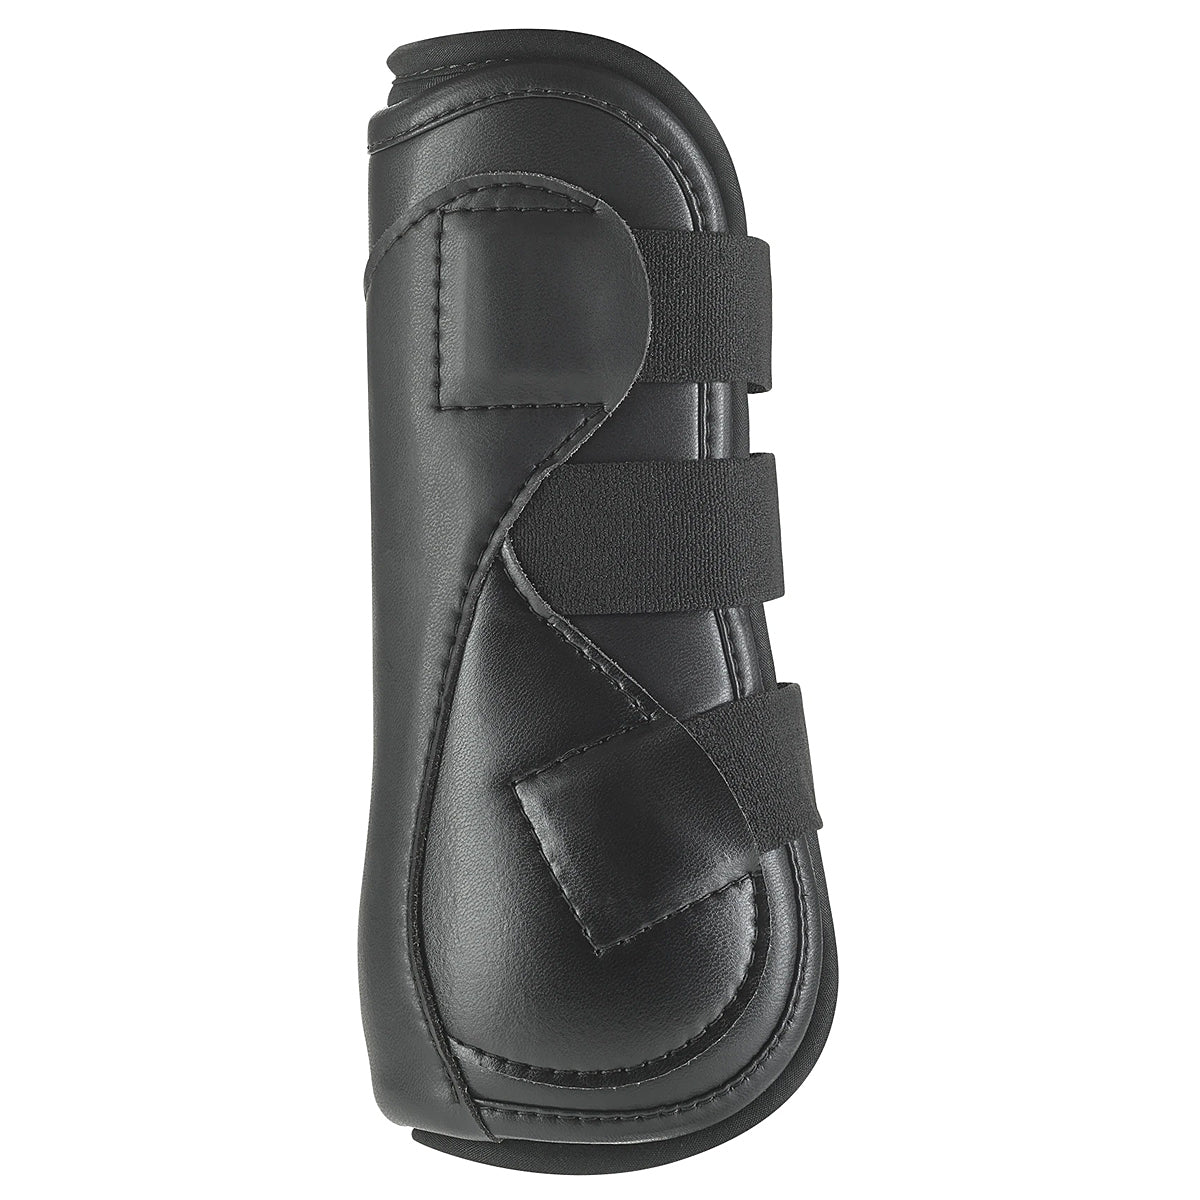 EquiFit Eq-Teq Front Boot